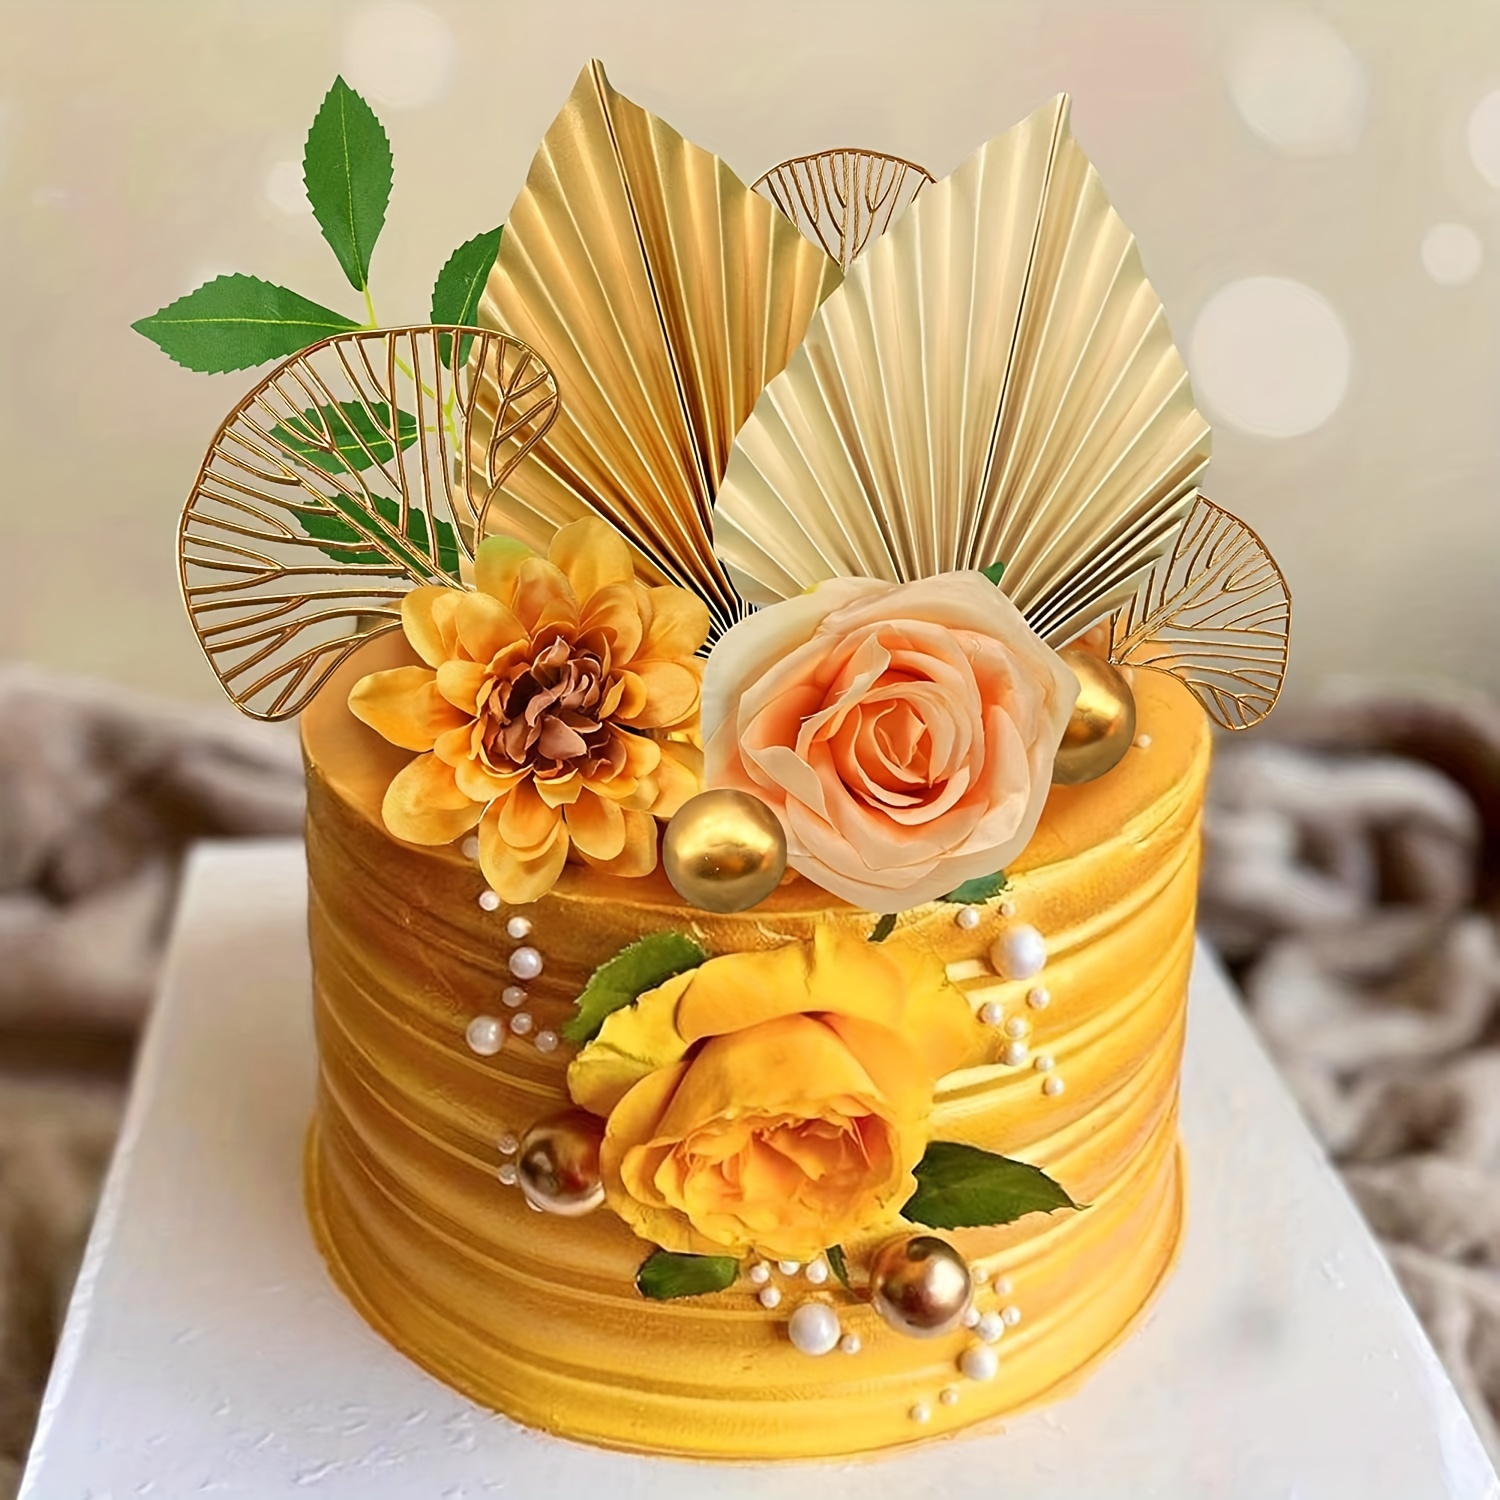 Share 83+ cake supplies free shipping best - awesomeenglish.edu.vn